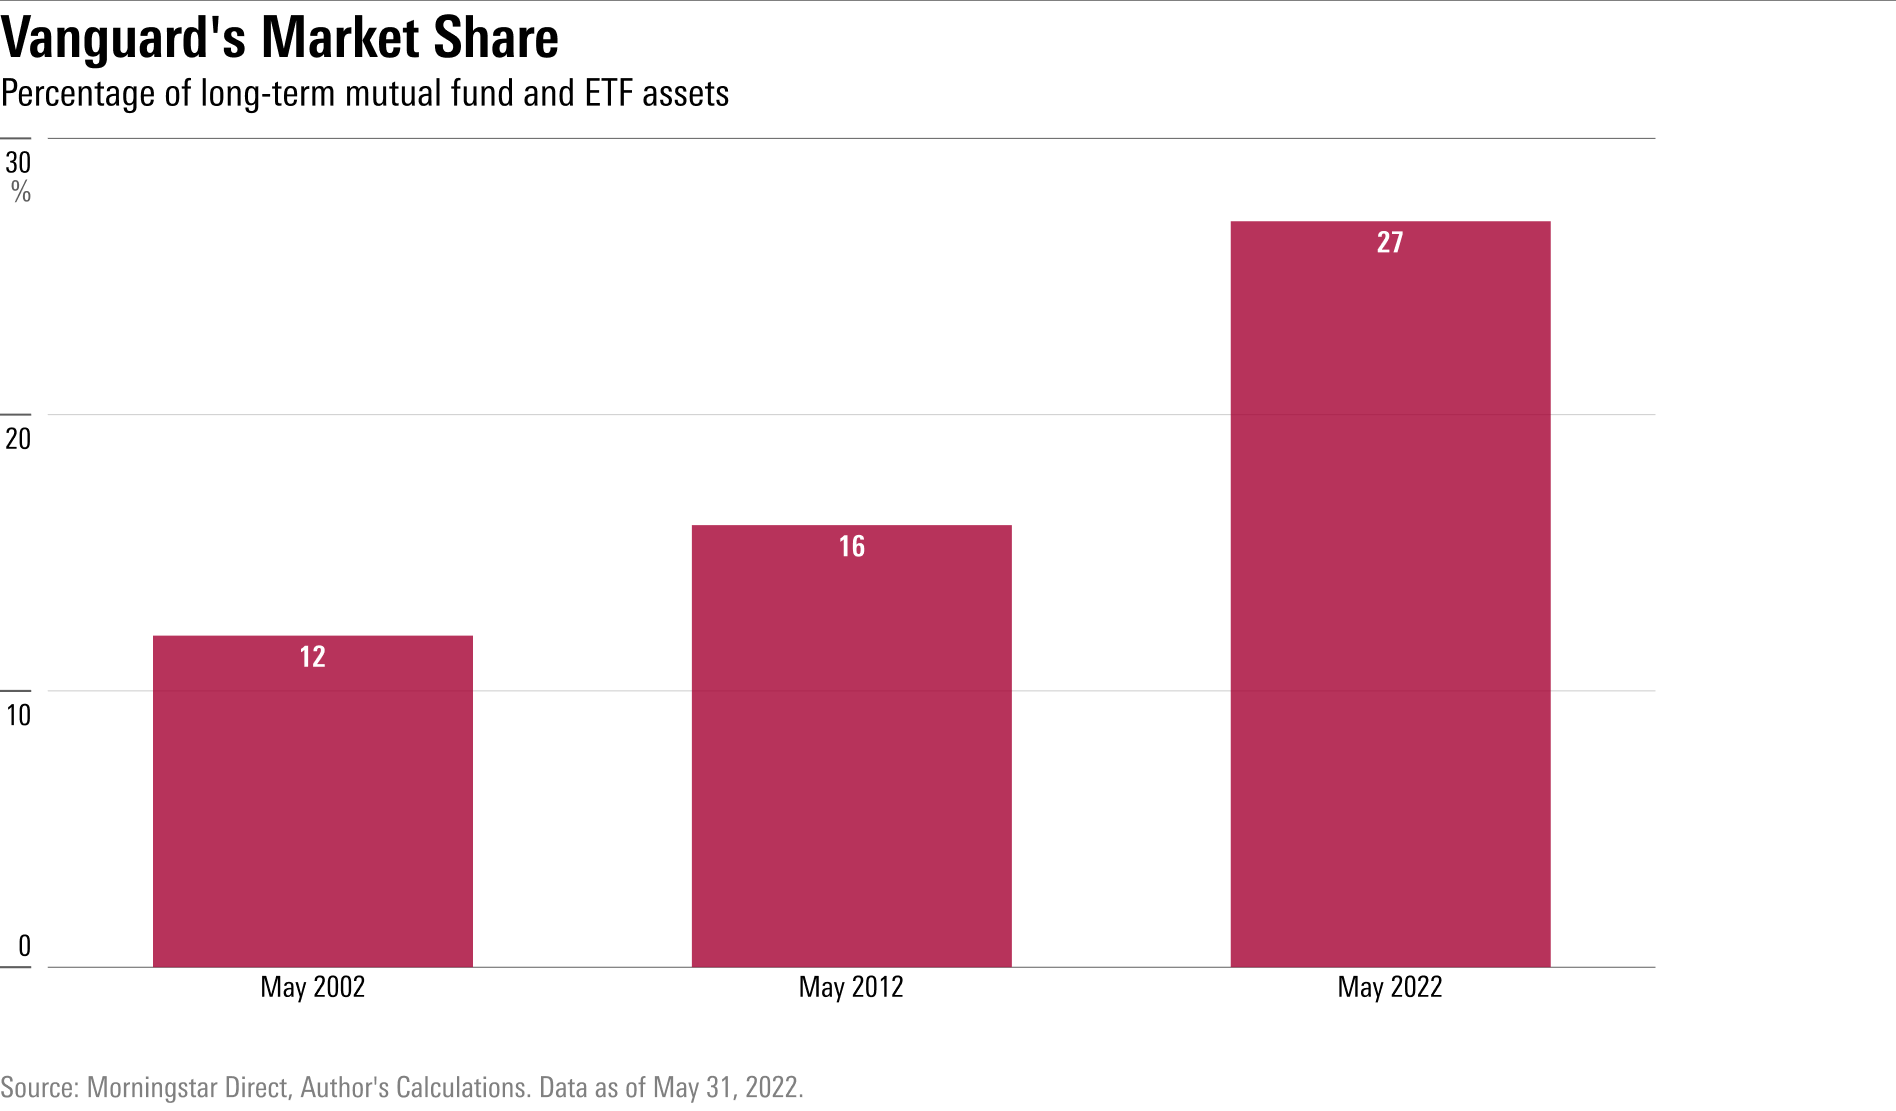 Vanguard's market share of long-term mutual fund and ETF assets, in May 2002, May 2012, and May 2022.